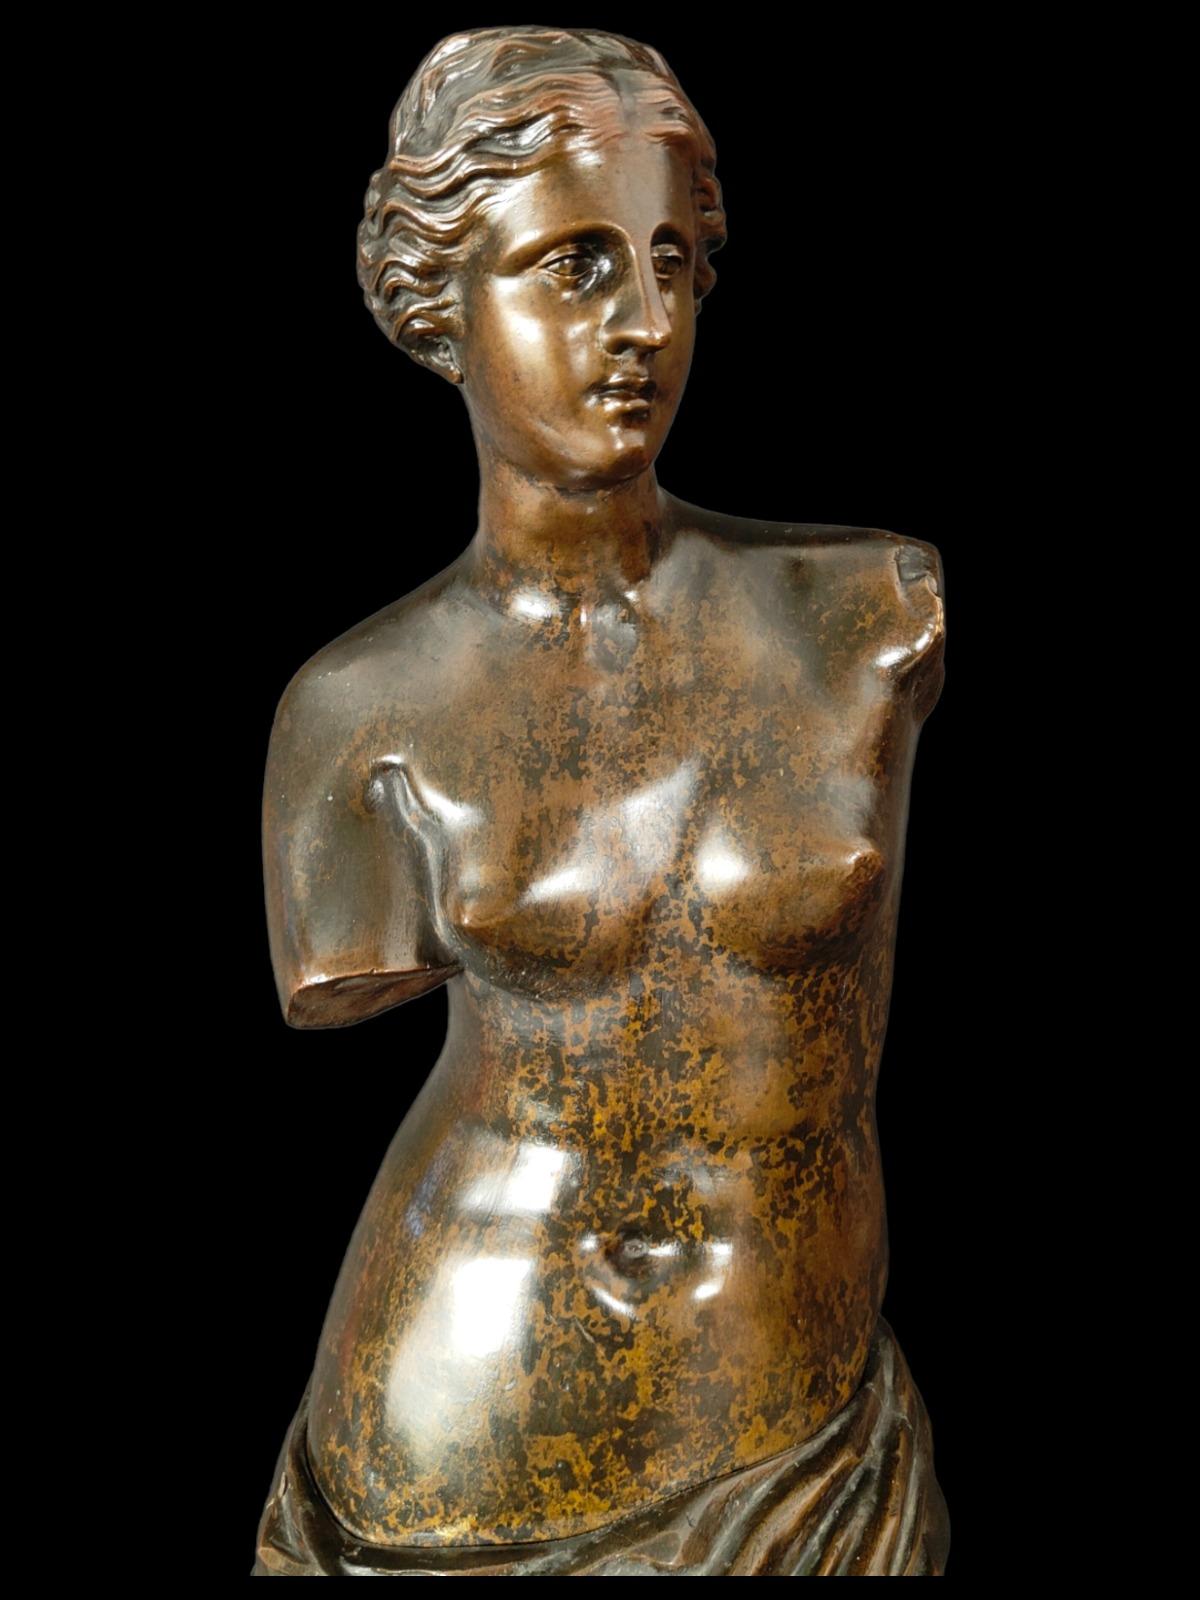 Bronze sculpture of Venus, Louvre museum. Large sculpture of Venus made in the 19th century by the louvre museum. Height: 96 cm.
Good condition.